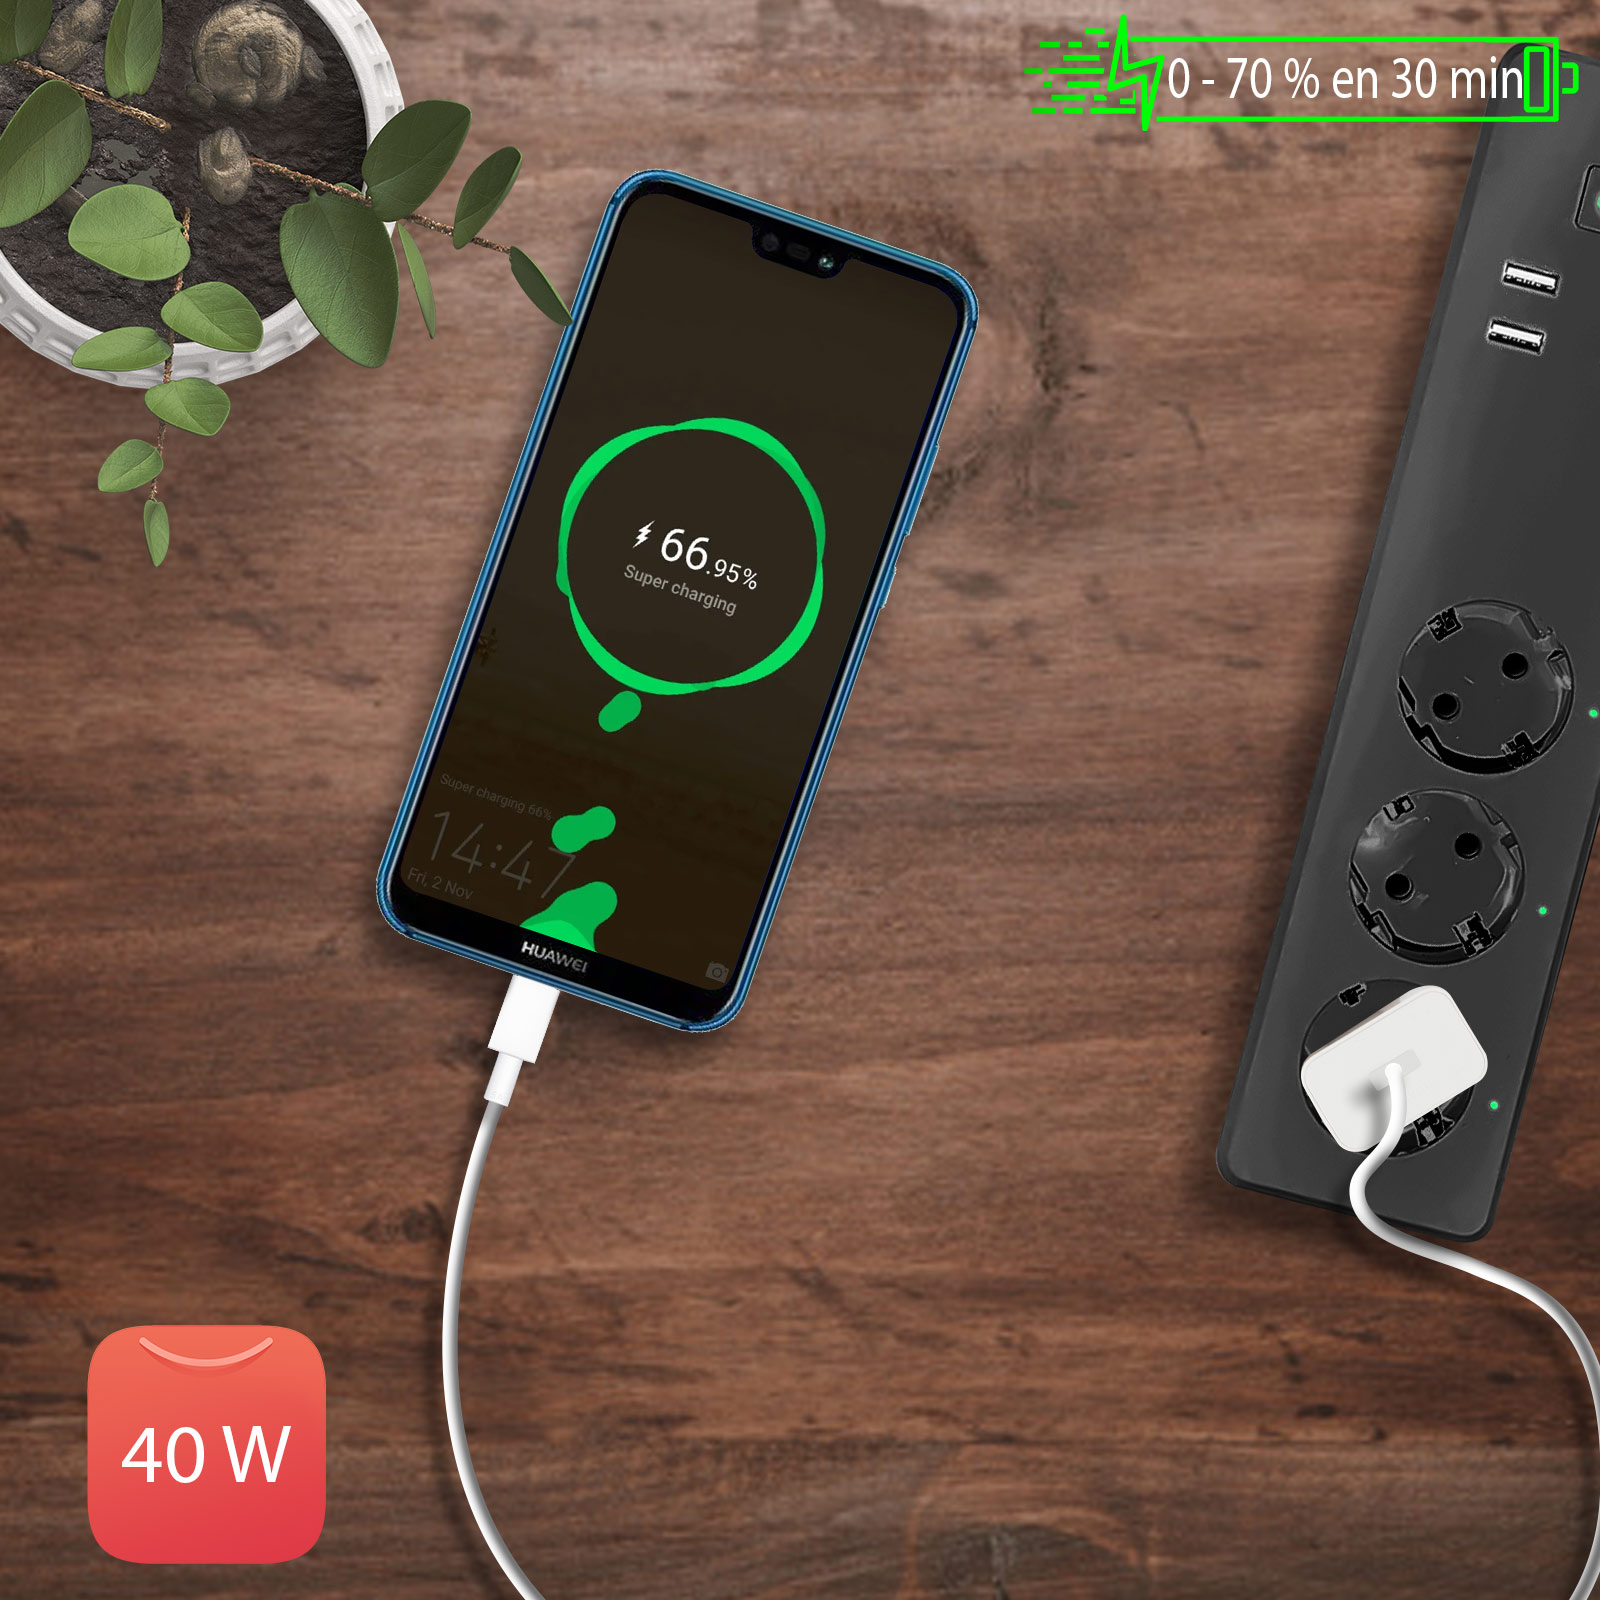 Adaptateur mural HUAWEI 40W SuperCharge Chargeer 5A Maroc